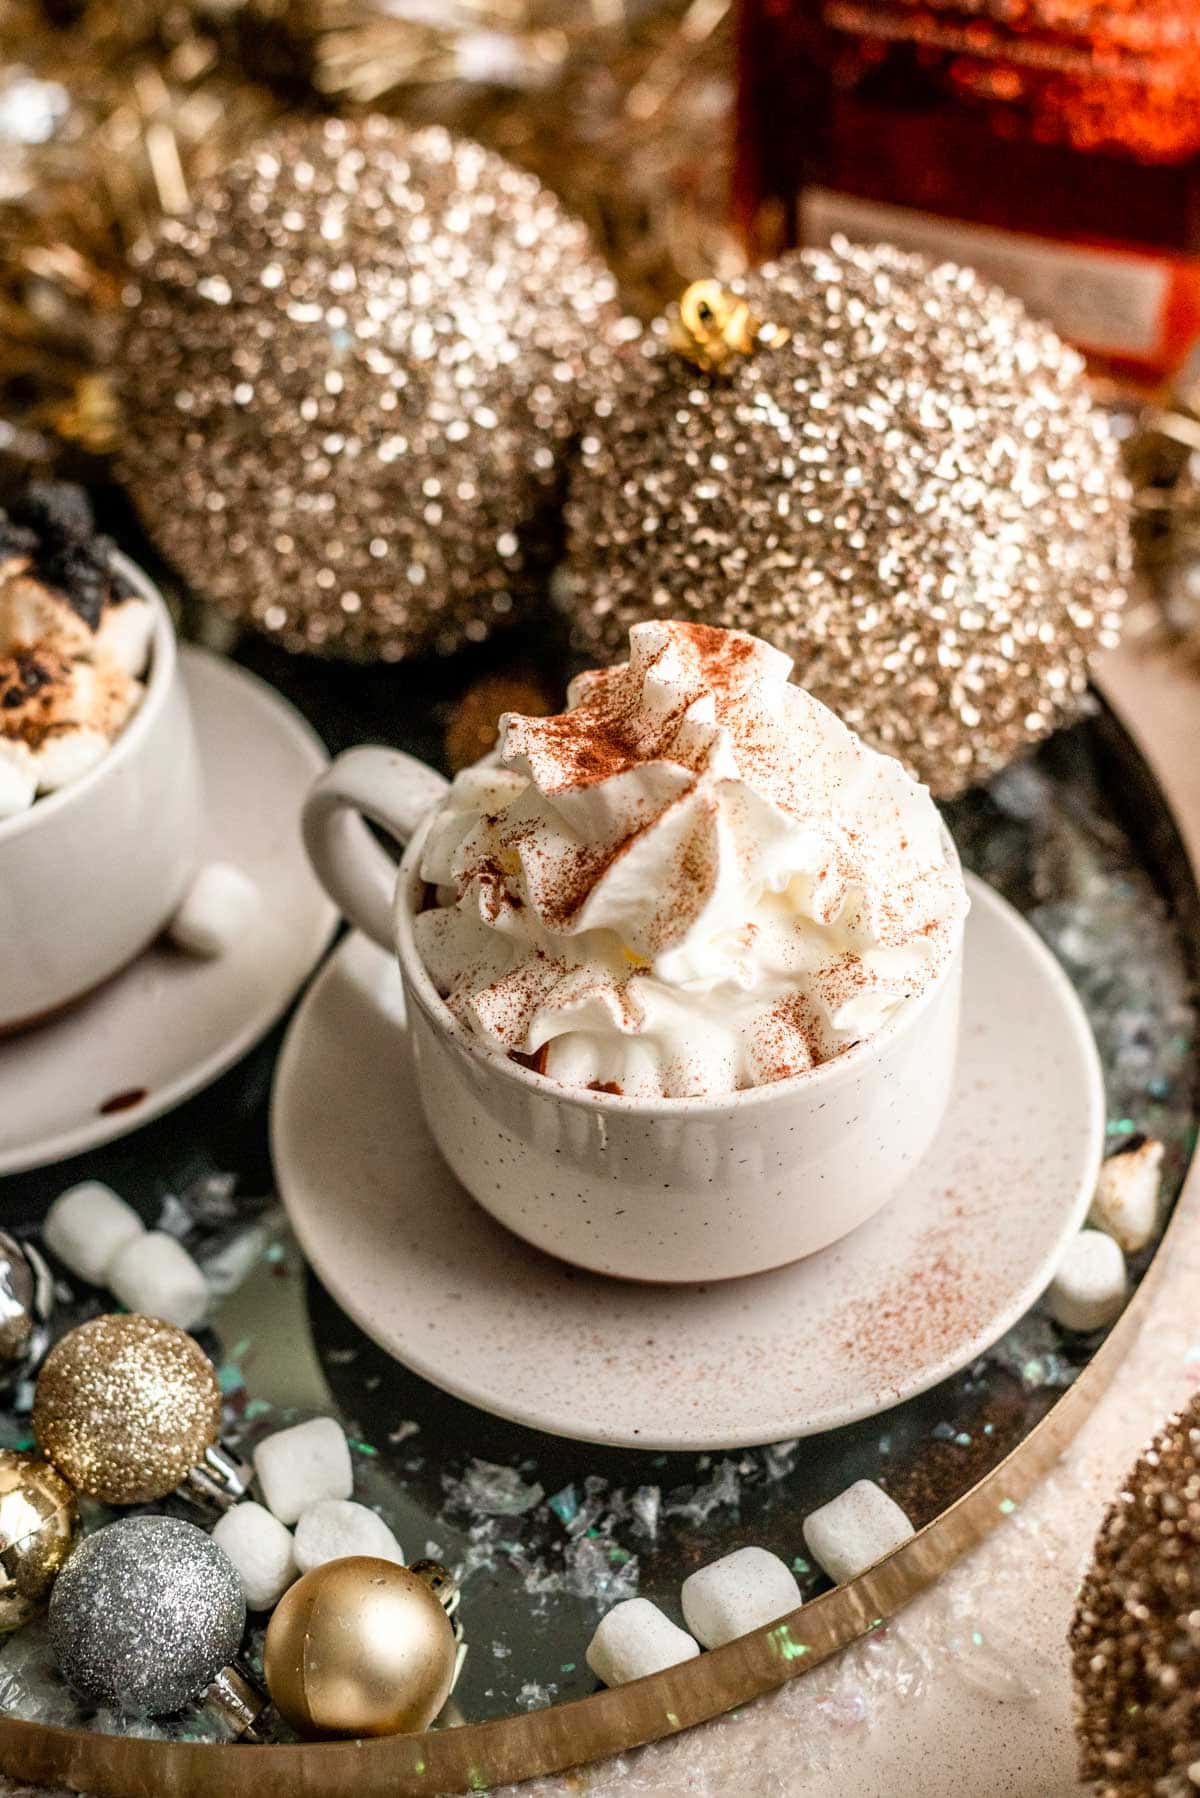 French hot chocolate topped with whipped cream and cinnamon in a white mug with a saucer.